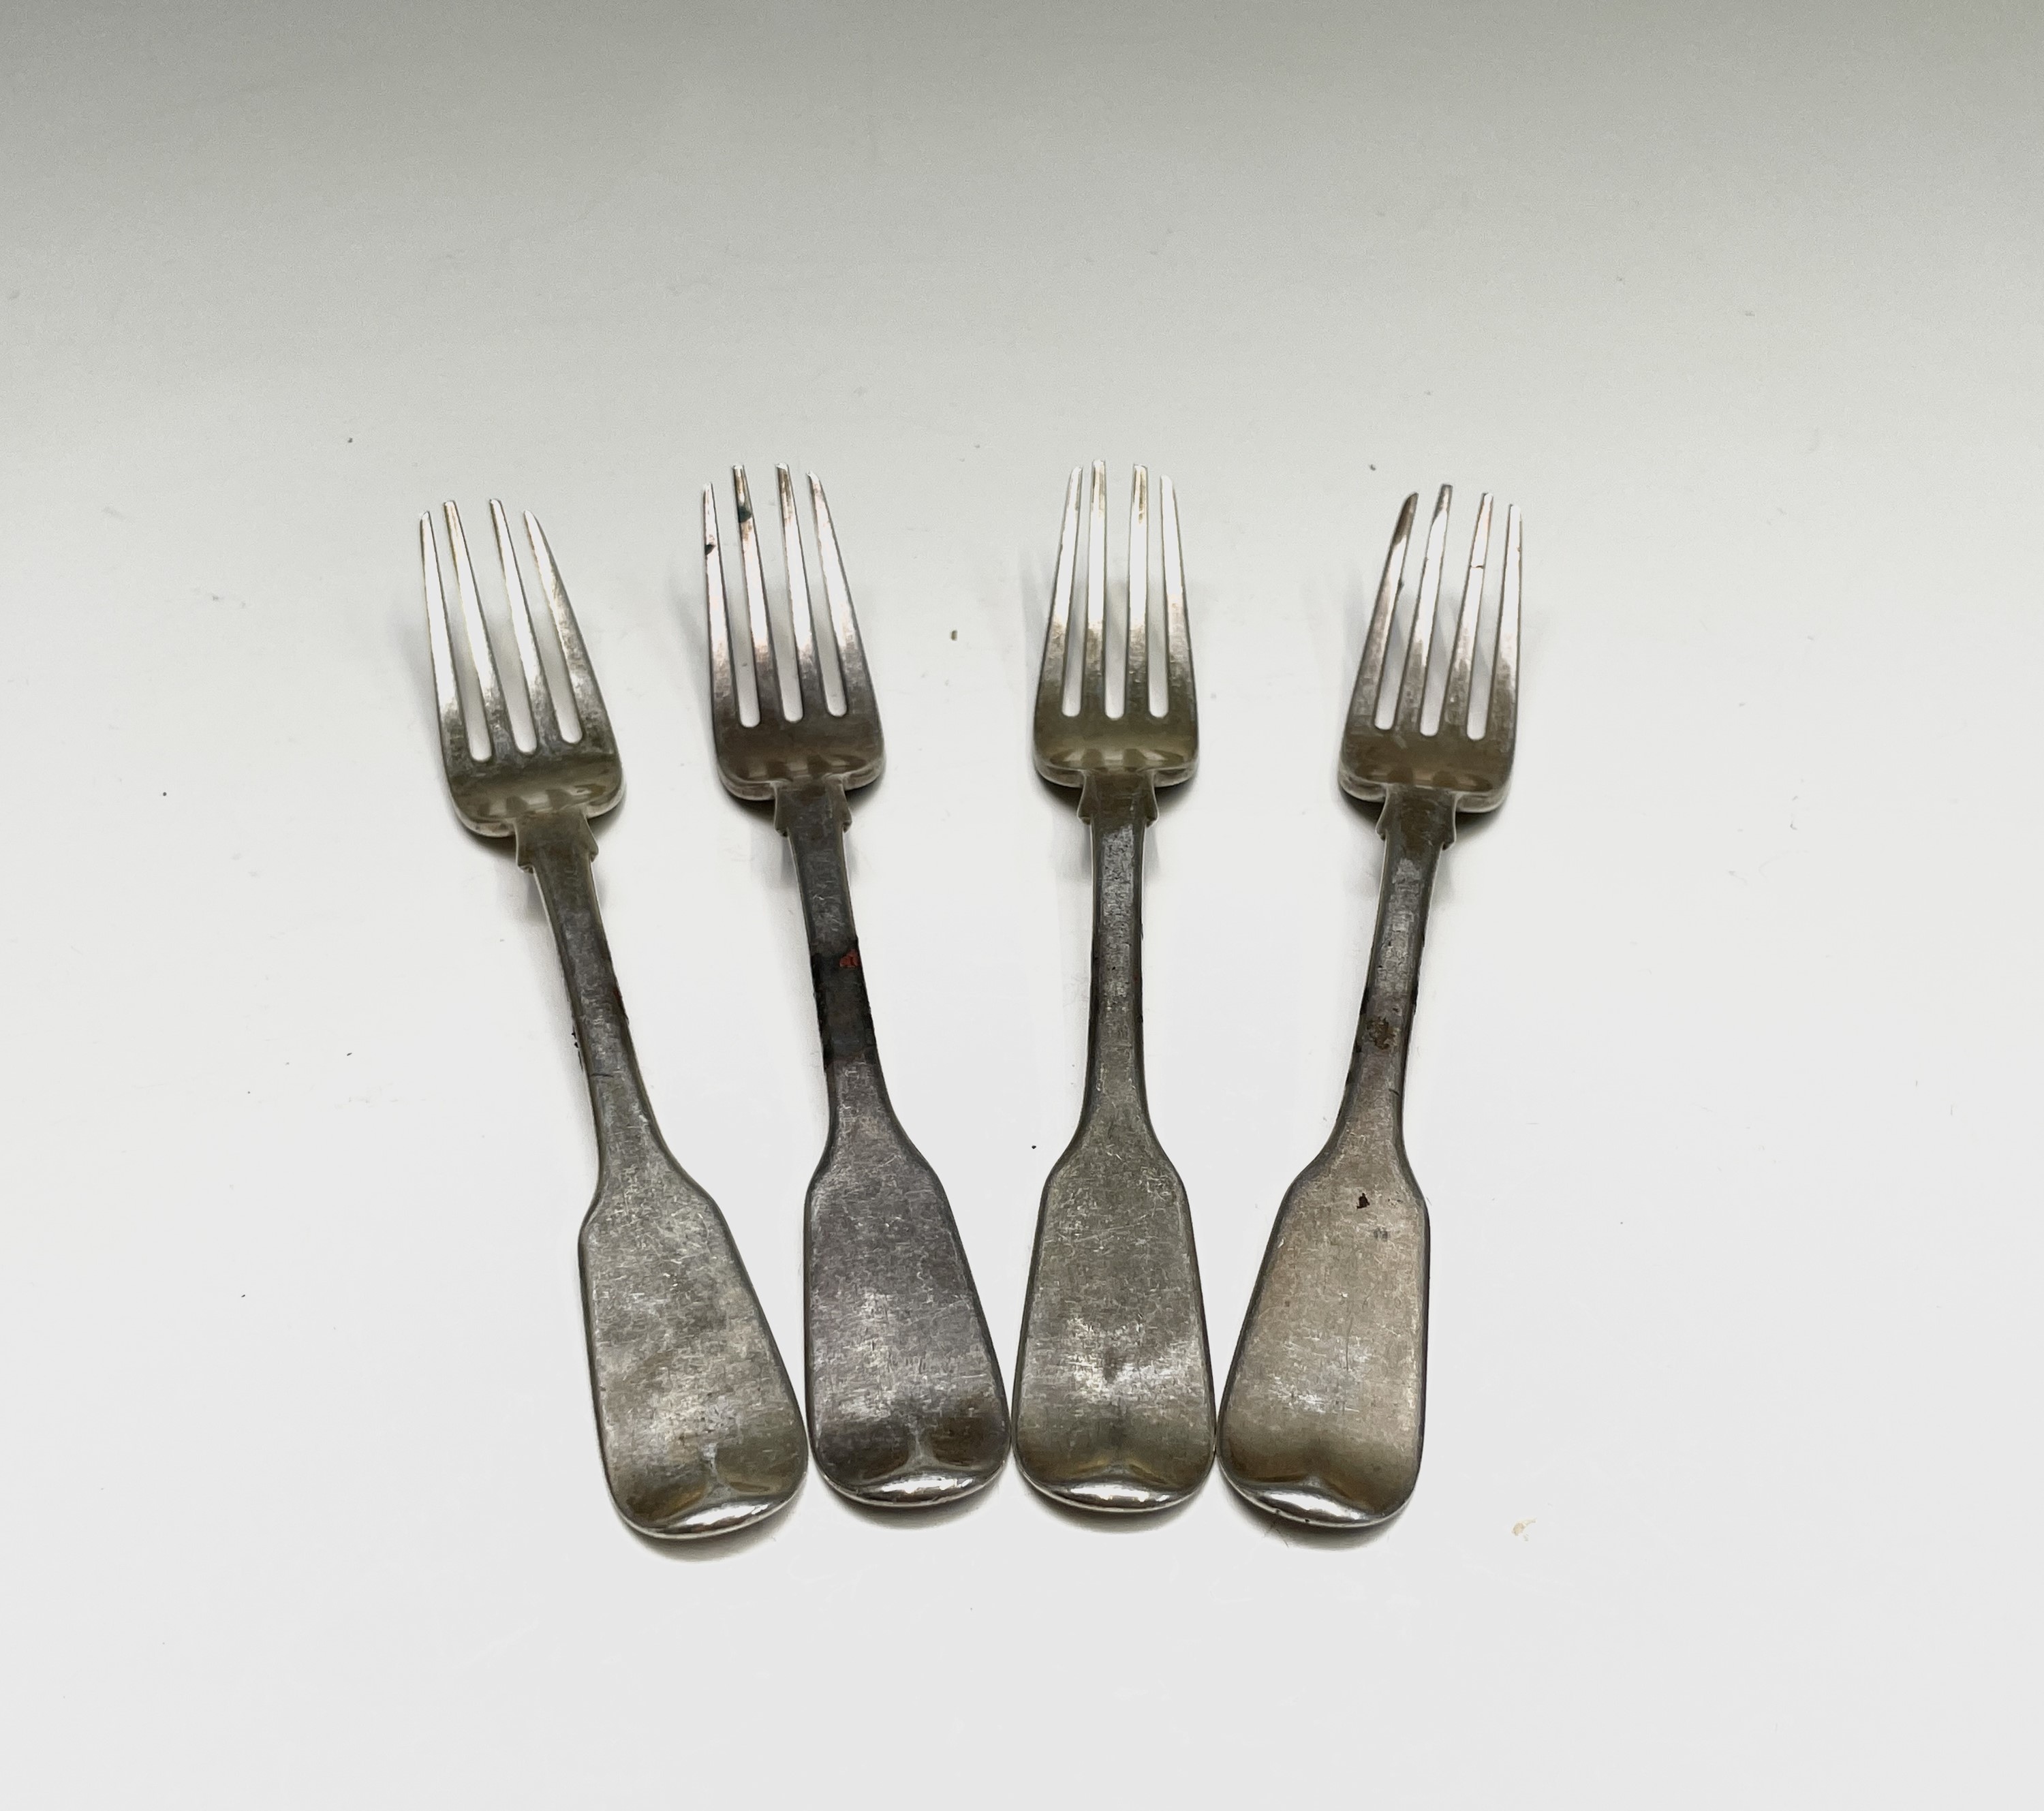 Four Exeter plain fiddle pattern silver tablespoons by Robert Williams & Sons (Robert, James & - Image 6 of 13